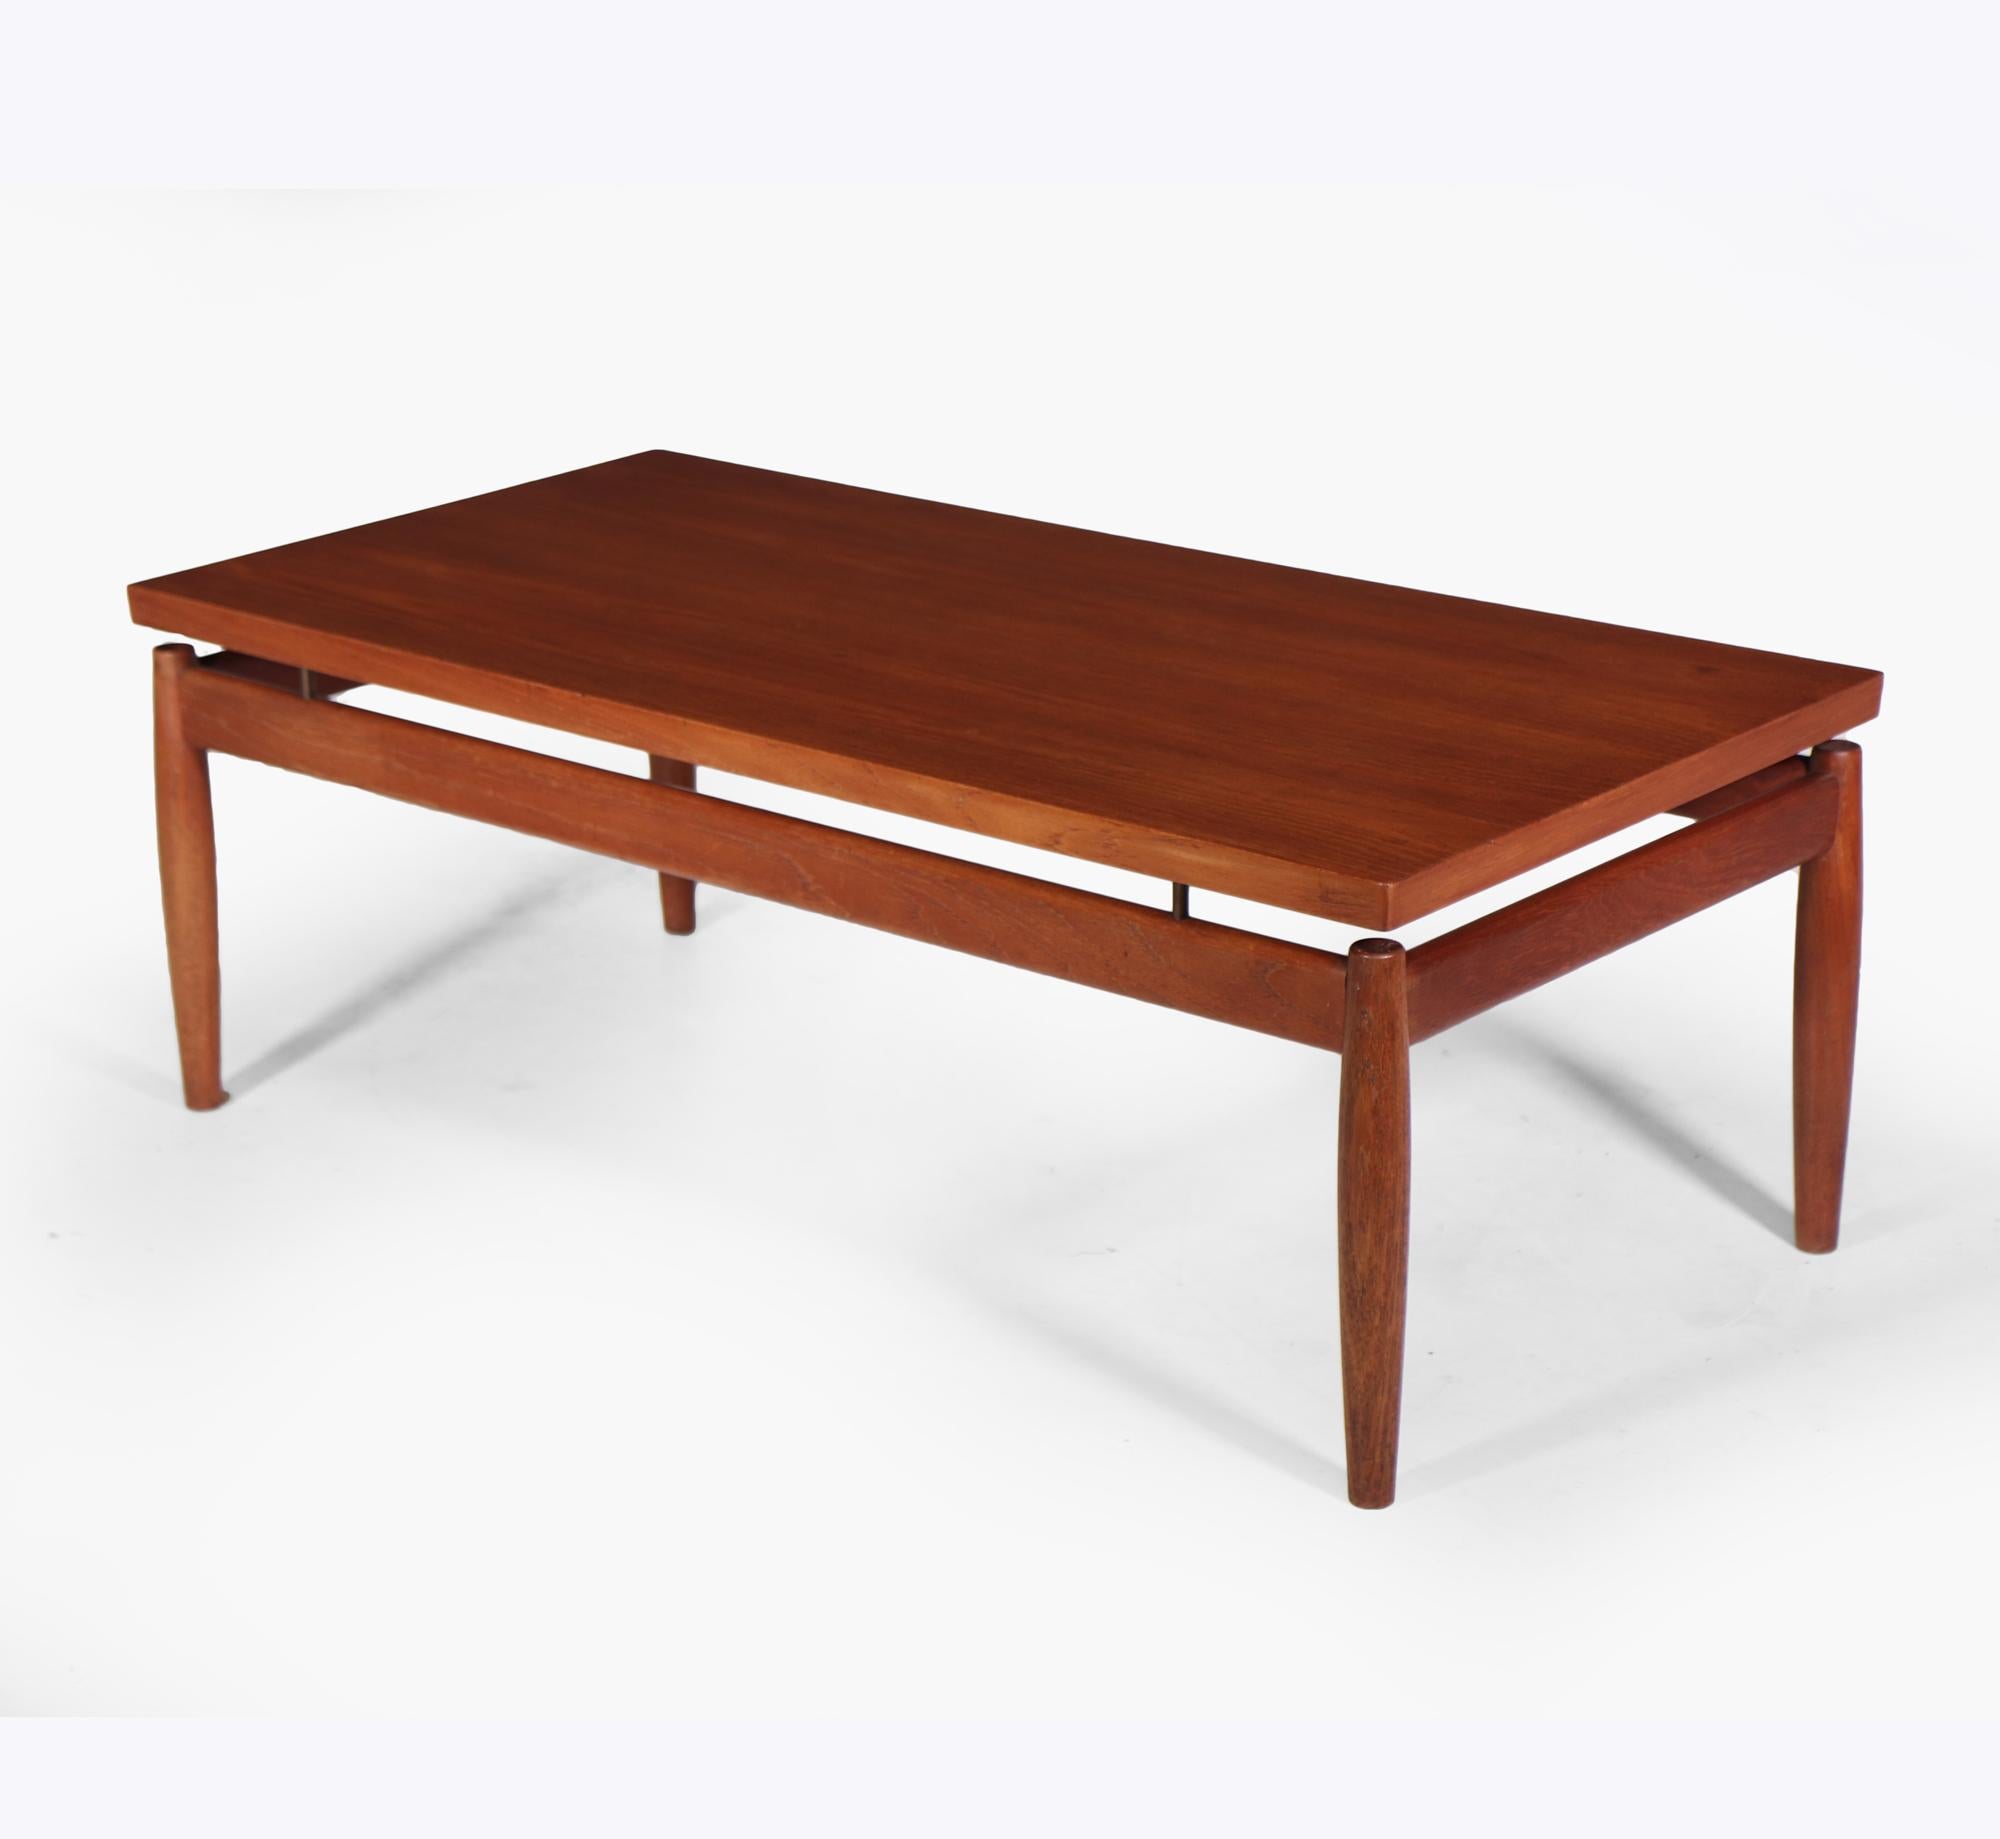 A lovely mid century table by designer Grete Jalk and produced in Denmark by France and Son, the table is solid teak and the top is veneered and in excellent condition throughout

Age: 1960

Style: Mid-Century Modern

Material: Teak

Origin